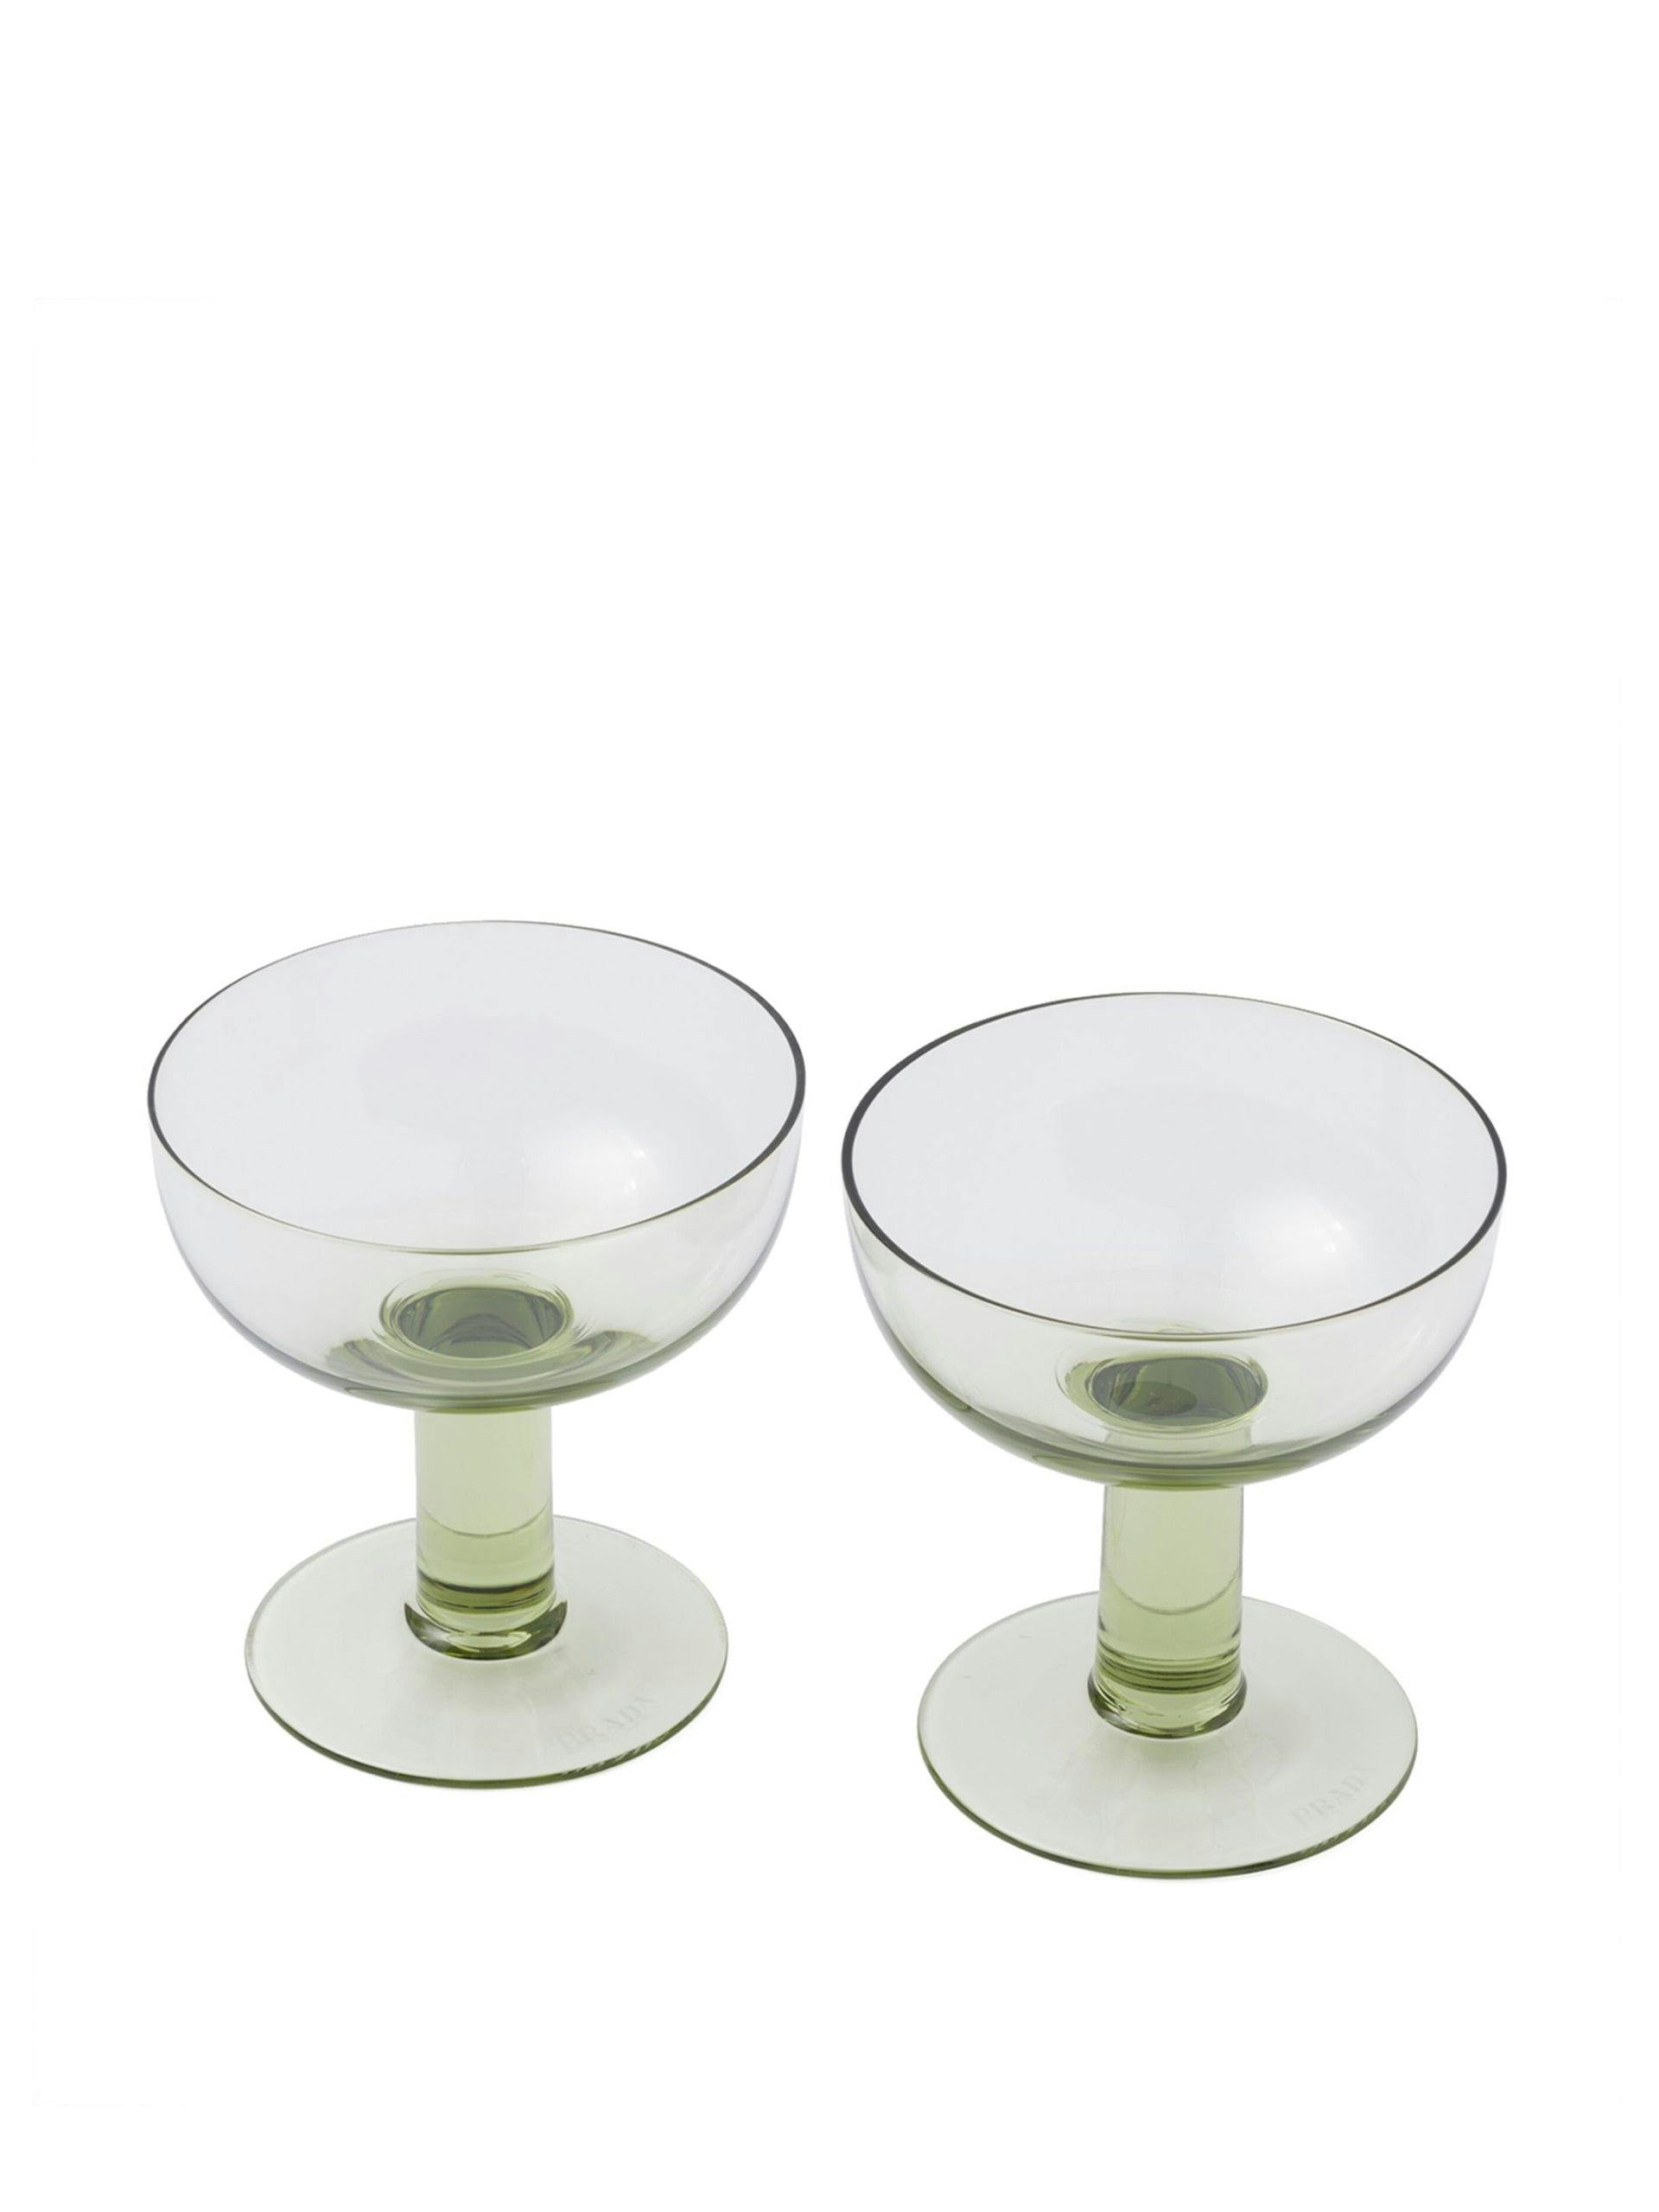 Green champagne coupes (Set of 2)